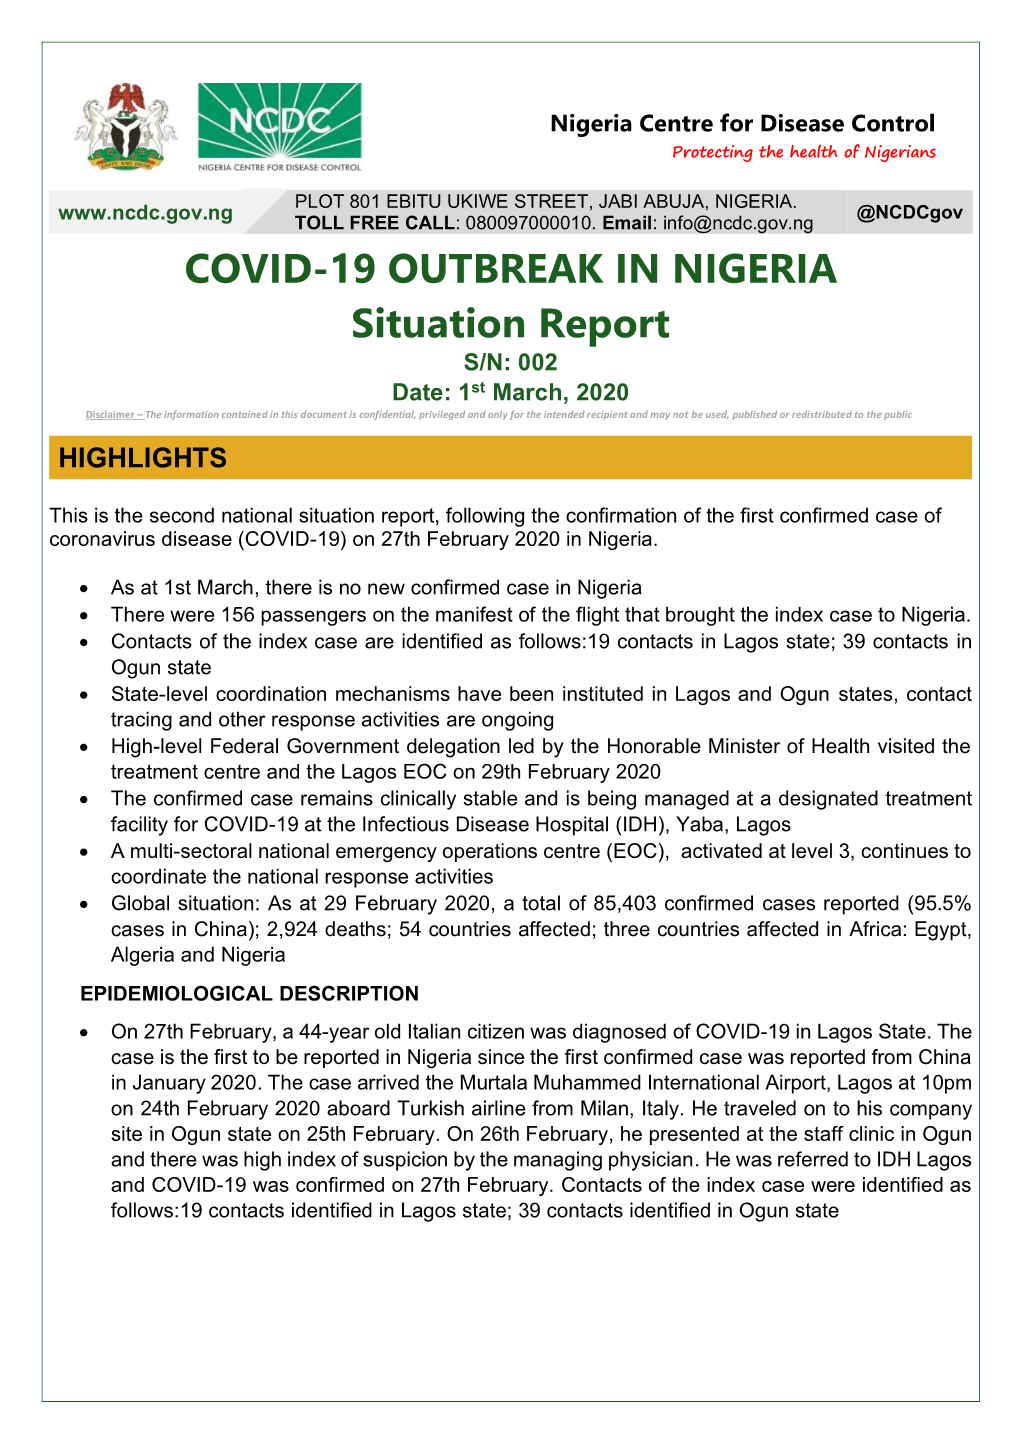 COVID-19 OUTBREAK in NIGERIA Situation Report